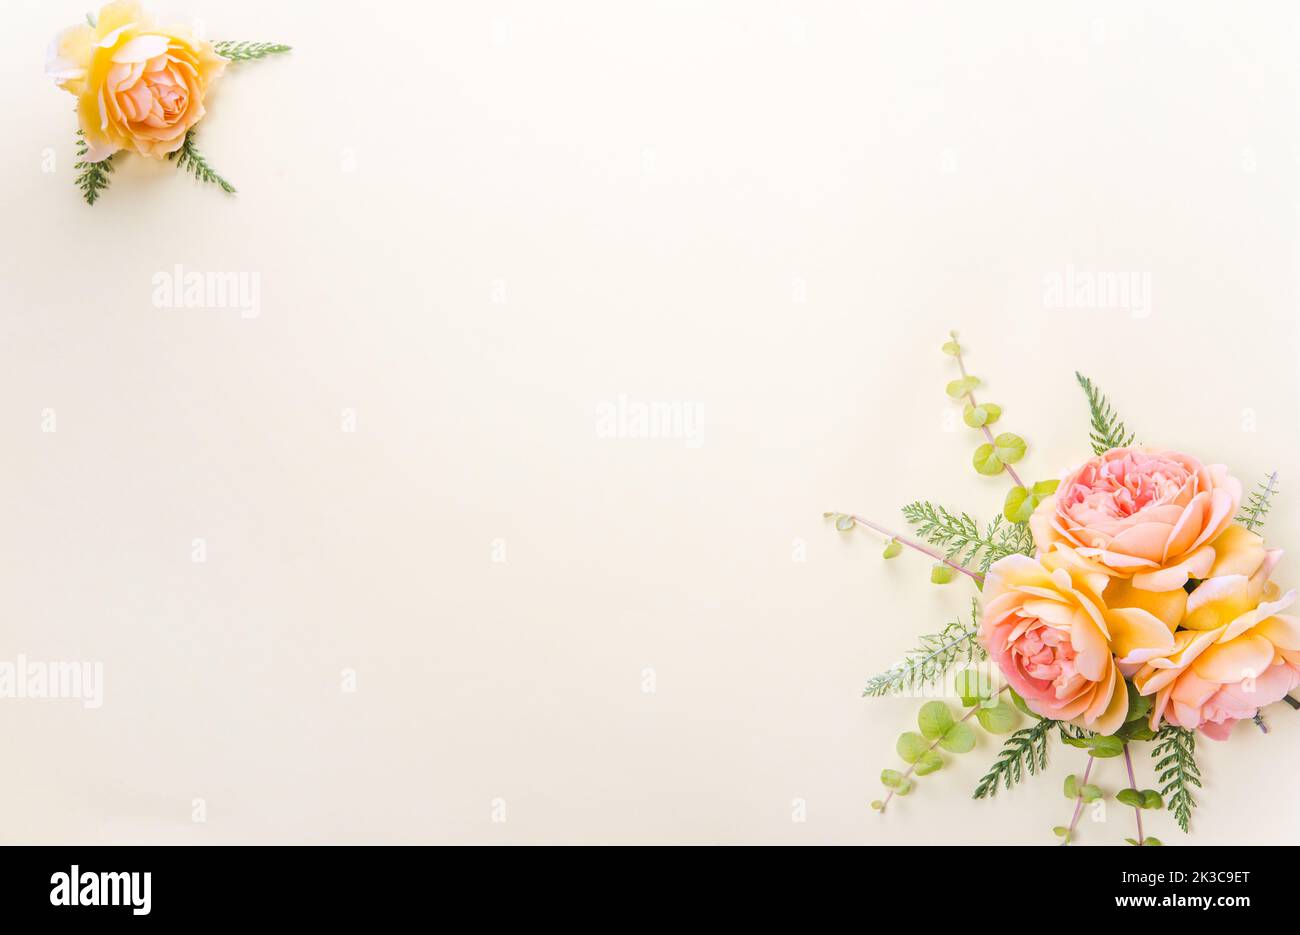 Autumn creative composition orange roses flowers on cream background. Fall, autumn background. Flat lay, top view, copy space Stock Photo